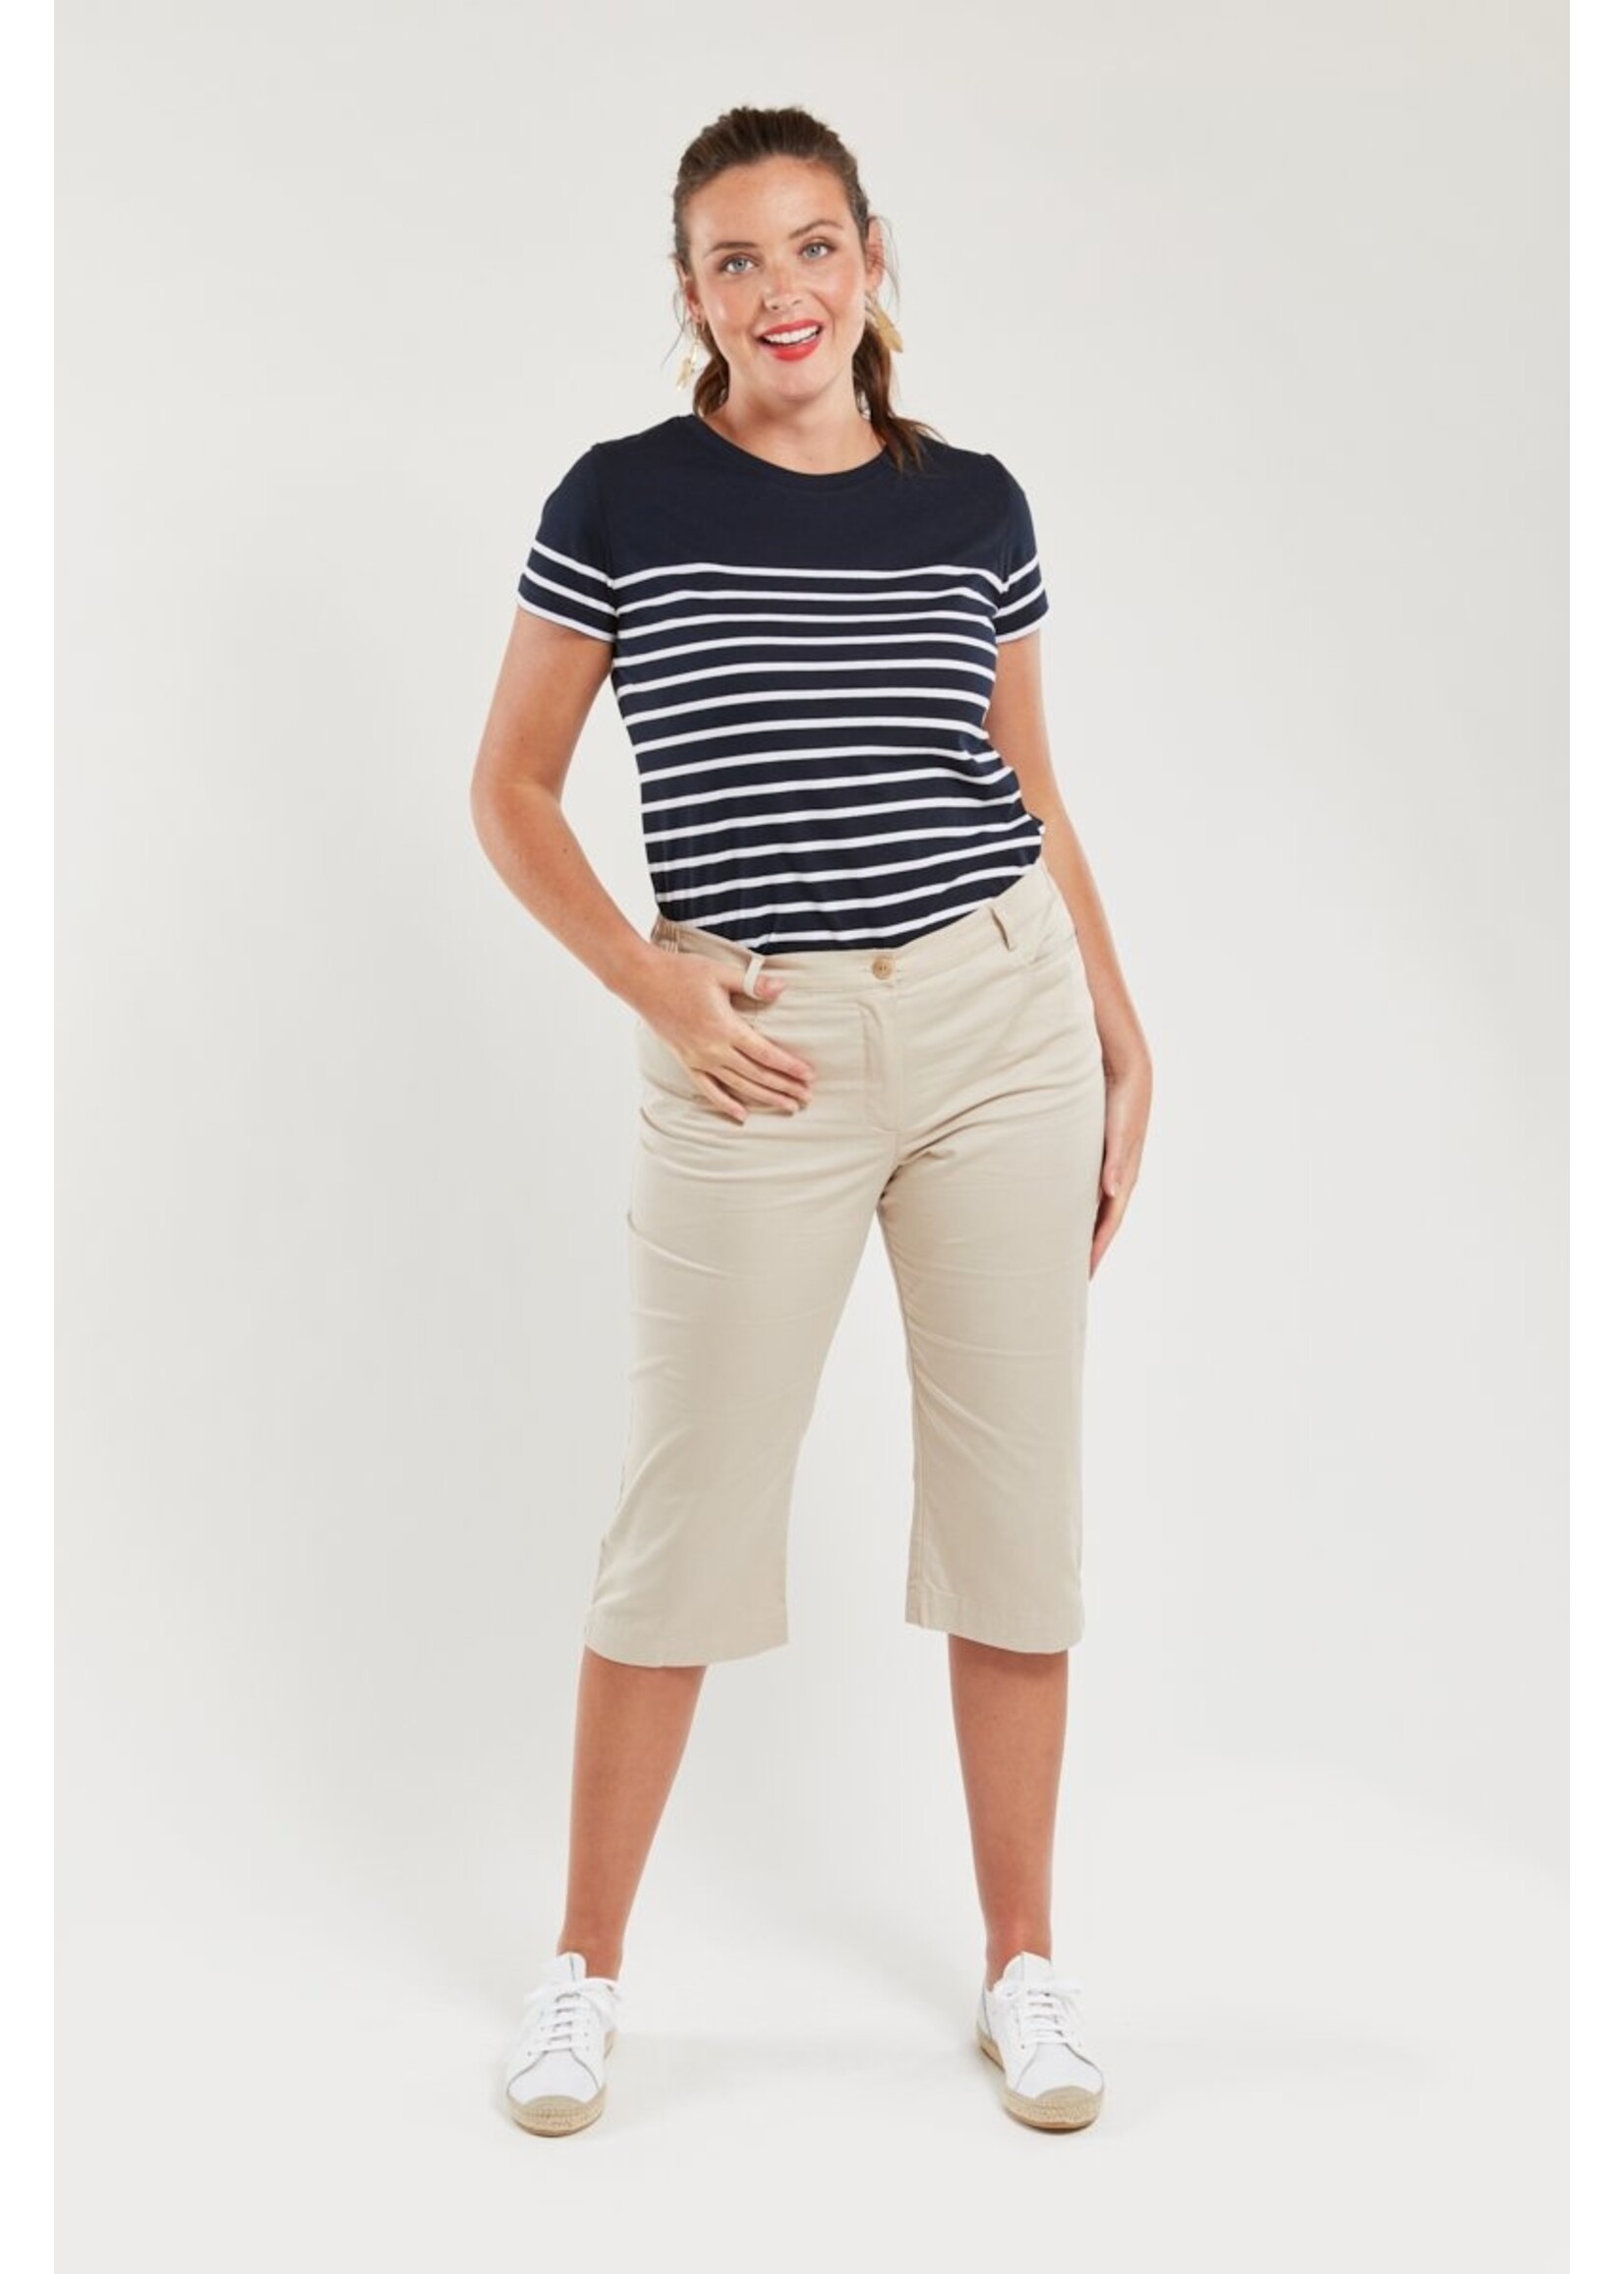 ARMOR-LUX Women's Heritage collection sailor shirt